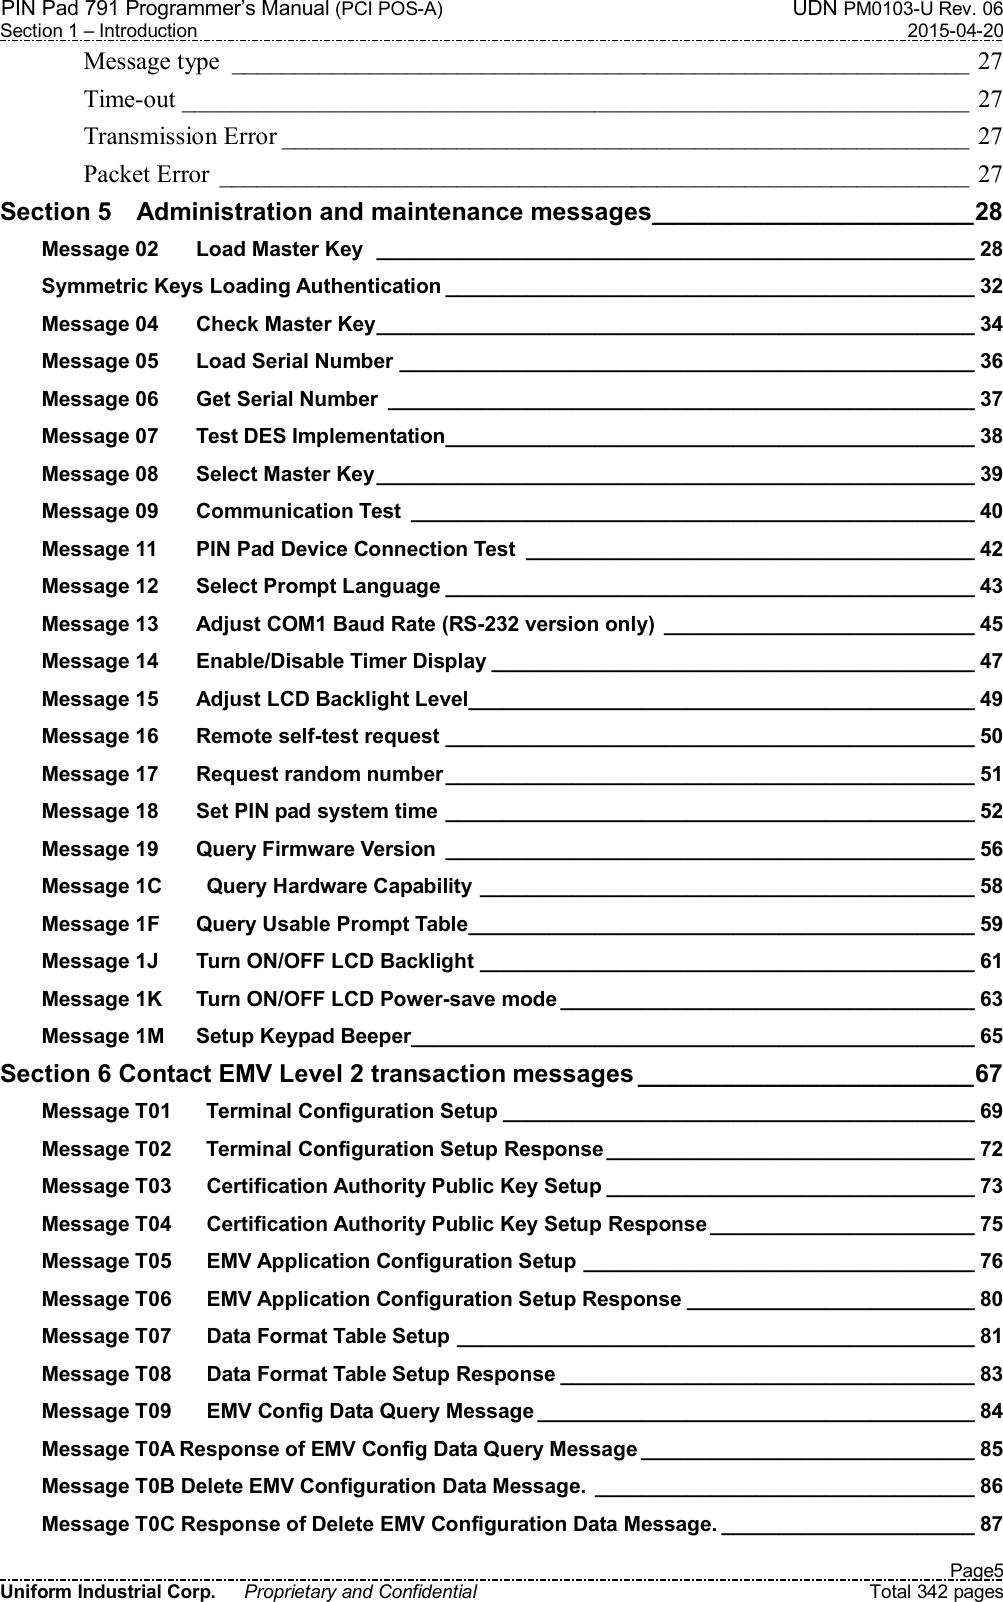 PIN Pad 791 Programmer’s Manual (PCI POS-A)  UDN PM0103-U Rev. 06 Section 1 – Introduction  2015-04-20   Page5 Uniform Industrial Corp.  Proprietary and Confidential  Total 342 pages Message type  ___________________________________________________________ 27 Time-out _______________________________________________________________ 27 Transmission Error _______________________________________________________ 27 Packet Error  ____________________________________________________________ 27 Section 5    Administration and maintenance messages _______________________ 28 Message 02 Load Master Key   ____________________________________________________ 28 Symmetric Keys Loading Authentication ______________________________________________ 32 Message 04 Check Master Key ____________________________________________________ 34 Message 05 Load Serial Number __________________________________________________ 36 Message 06 Get Serial Number  ___________________________________________________ 37 Message 07 Test DES Implementation ______________________________________________ 38 Message 08 Select Master Key ____________________________________________________ 39 Message 09 Communication Test  _________________________________________________ 40 Message 11 PIN Pad Device Connection Test  _______________________________________ 42 Message 12 Select Prompt Language ______________________________________________ 43 Message 13 Adjust COM1 Baud Rate (RS-232 version only)  ___________________________ 45 Message 14 Enable/Disable Timer Display __________________________________________ 47 Message 15 Adjust LCD Backlight Level ____________________________________________ 49 Message 16 Remote self-test request ______________________________________________ 50 Message 17 Request random number ______________________________________________ 51 Message 18 Set PIN pad system time  ______________________________________________ 52 Message 19 Query Firmware Version  ______________________________________________ 56 Message 1C   Query Hardware Capability ___________________________________________ 58 Message 1F Query Usable Prompt Table ____________________________________________ 59 Message 1J Turn ON/OFF LCD Backlight ___________________________________________ 61 Message 1K Turn ON/OFF LCD Power-save mode ____________________________________ 63 Message 1M Setup Keypad Beeper _________________________________________________ 65 Section 6 Contact EMV Level 2 transaction messages ________________________ 67 Message T01   Terminal Configuration Setup _________________________________________ 69 Message T02   Terminal Configuration Setup Response ________________________________ 72 Message T03   Certification Authority Public Key Setup ________________________________ 73 Message T04   Certification Authority Public Key Setup Response _______________________ 75 Message T05   EMV Application Configuration Setup __________________________________ 76 Message T06   EMV Application Configuration Setup Response _________________________ 80 Message T07   Data Format Table Setup _____________________________________________ 81 Message T08   Data Format Table Setup Response ____________________________________ 83 Message T09   EMV Config Data Query Message ______________________________________ 84 Message T0A Response of EMV Config Data Query Message _____________________________ 85 Message T0B Delete EMV Configuration Data Message.  _________________________________ 86 Message T0C Response of Delete EMV Configuration Data Message. ______________________ 87 